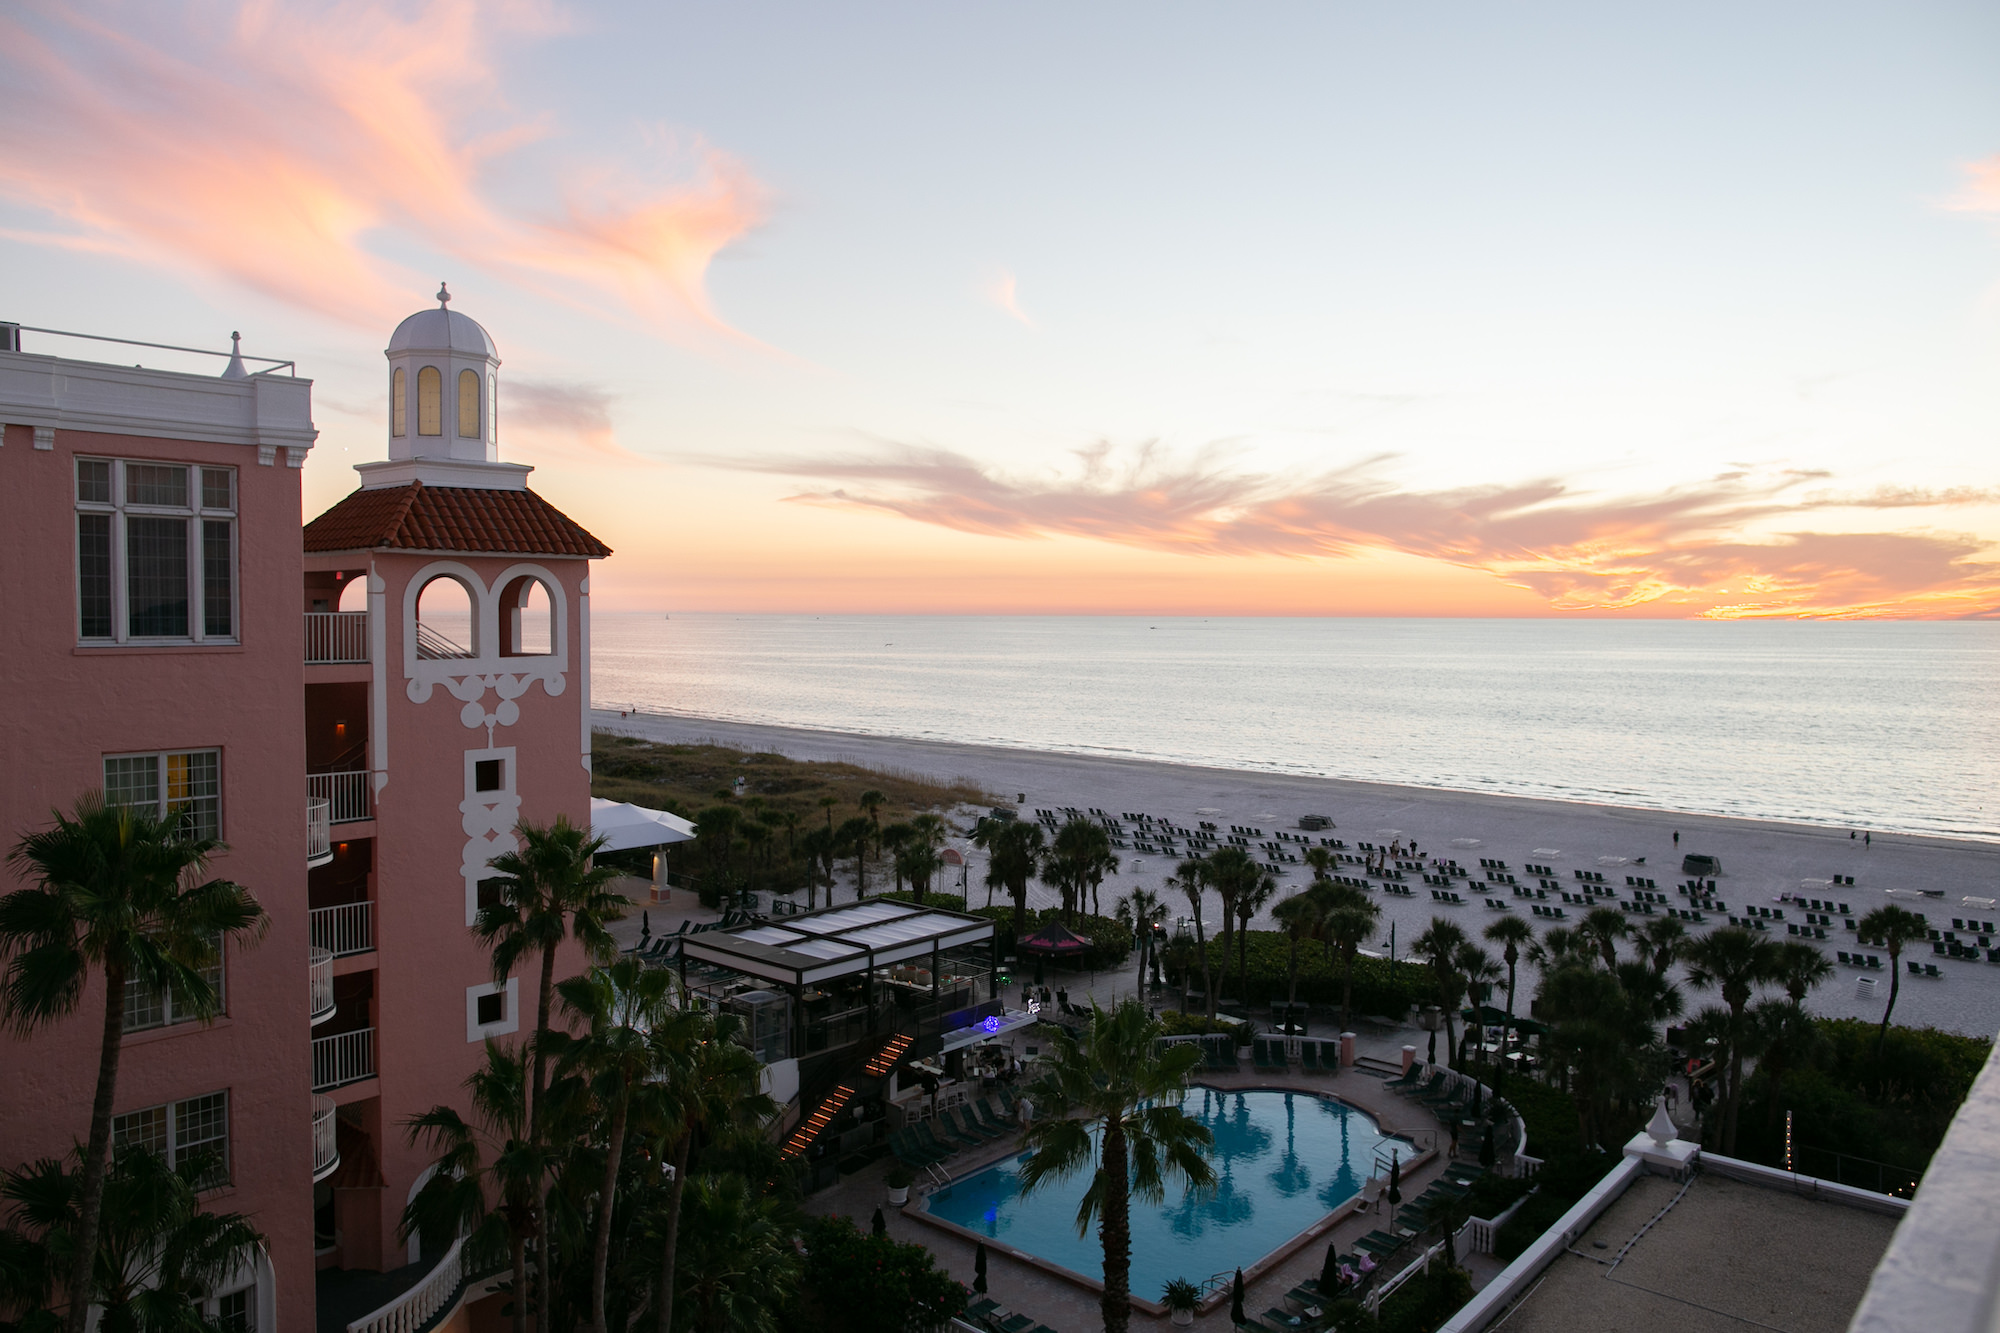 St. Pete Historic Wedding Venue The Don CeSar, Pink Palace | Tampa Wedding Photographer Carrie Wildes Photography